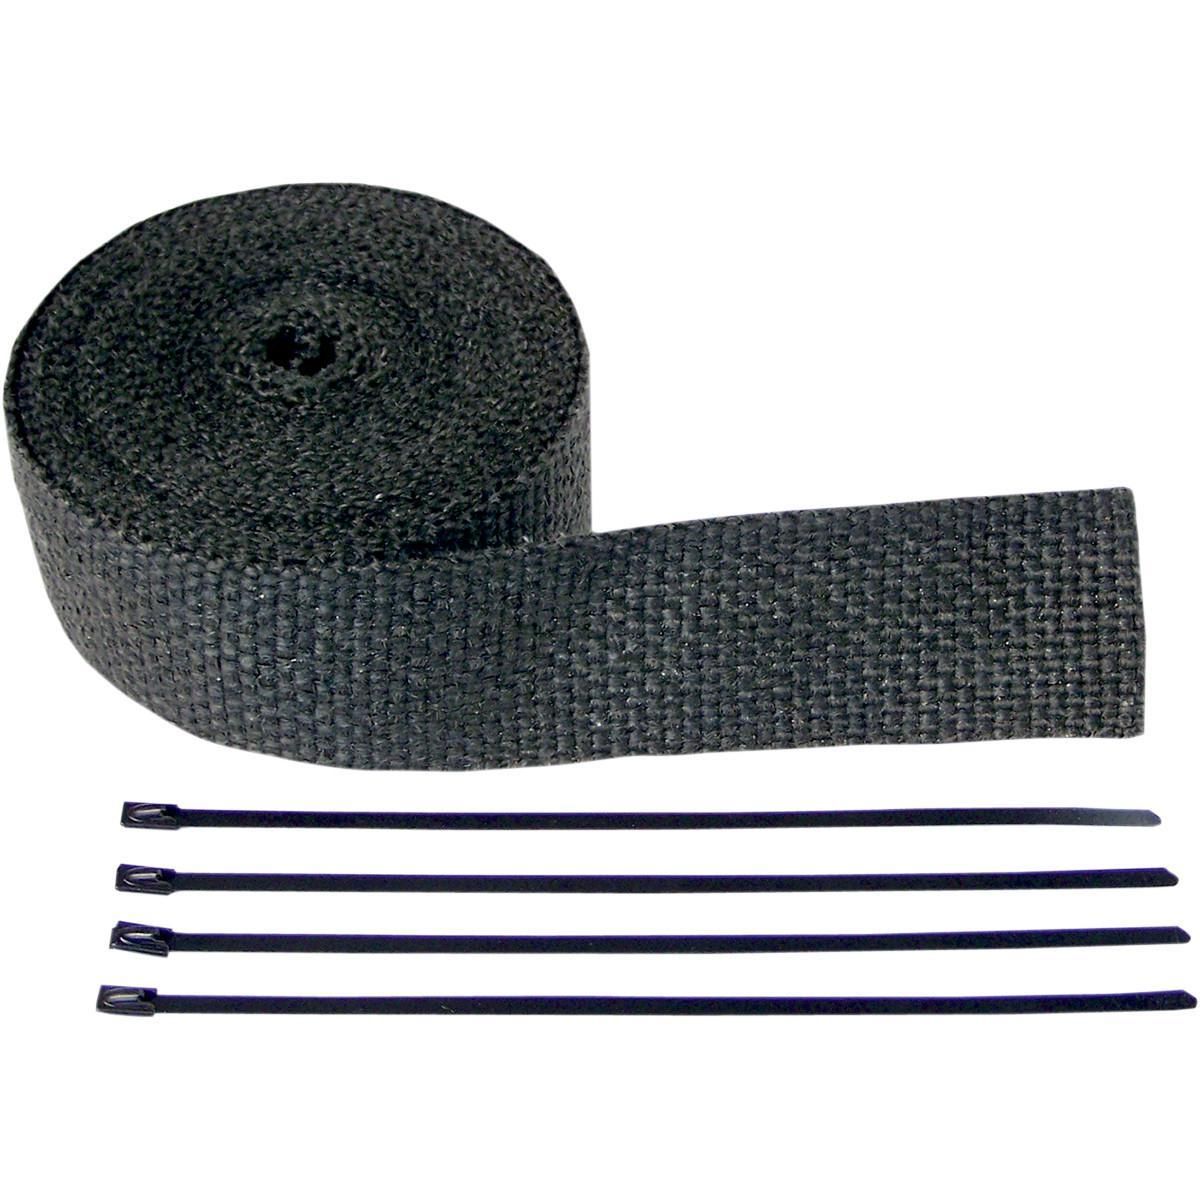 21RT-CYCLE-PERFO-CPP-9042B Exhaust Pipe Wrap with Tie Wrap - 2in. x 25ft. - Black